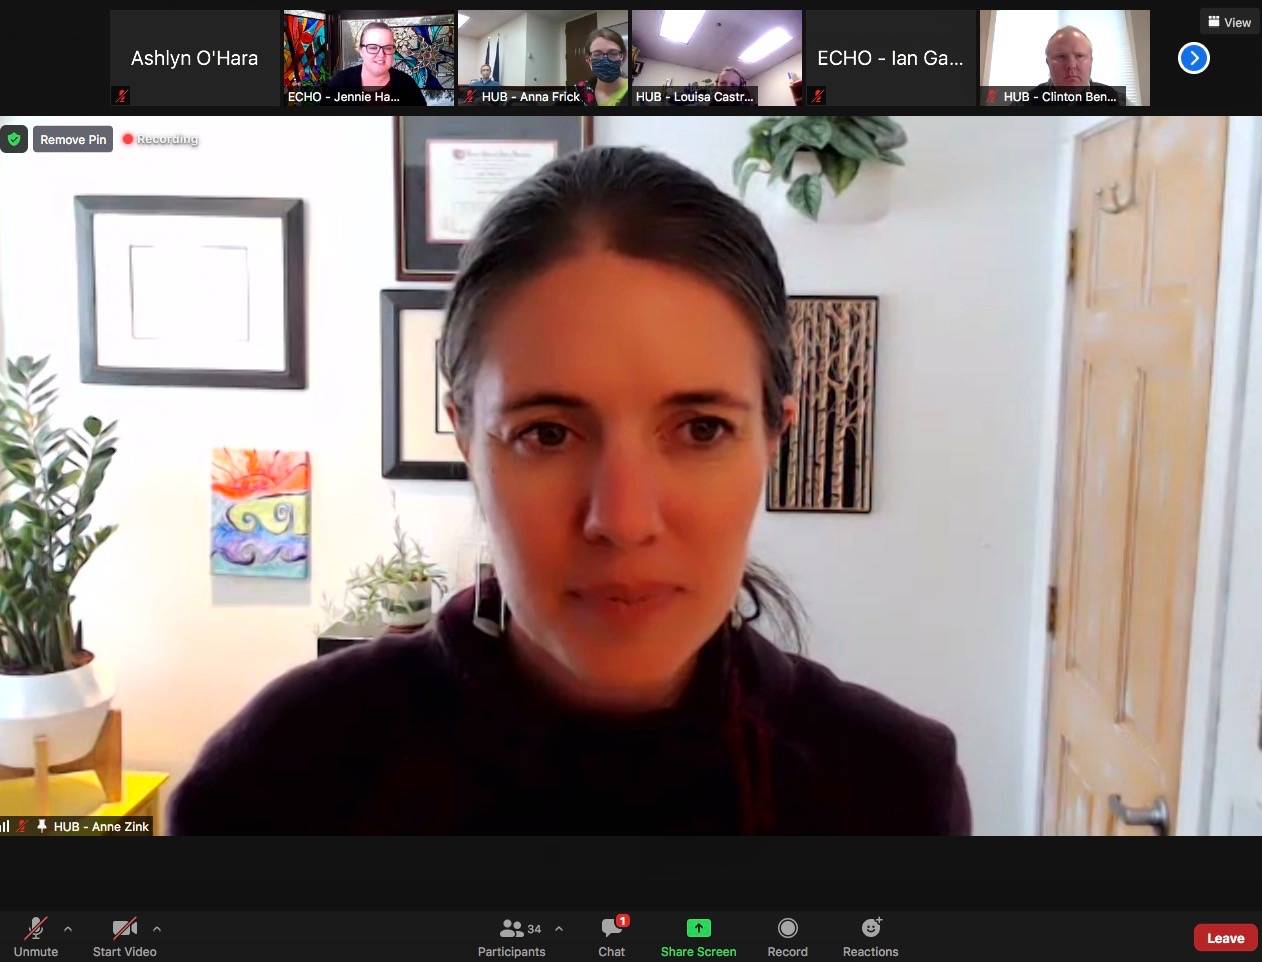 Dr. Anne Zink addresses members of the media during a remote press conference on Thursday, Feb. 25 in Alaska. (Screenshot)